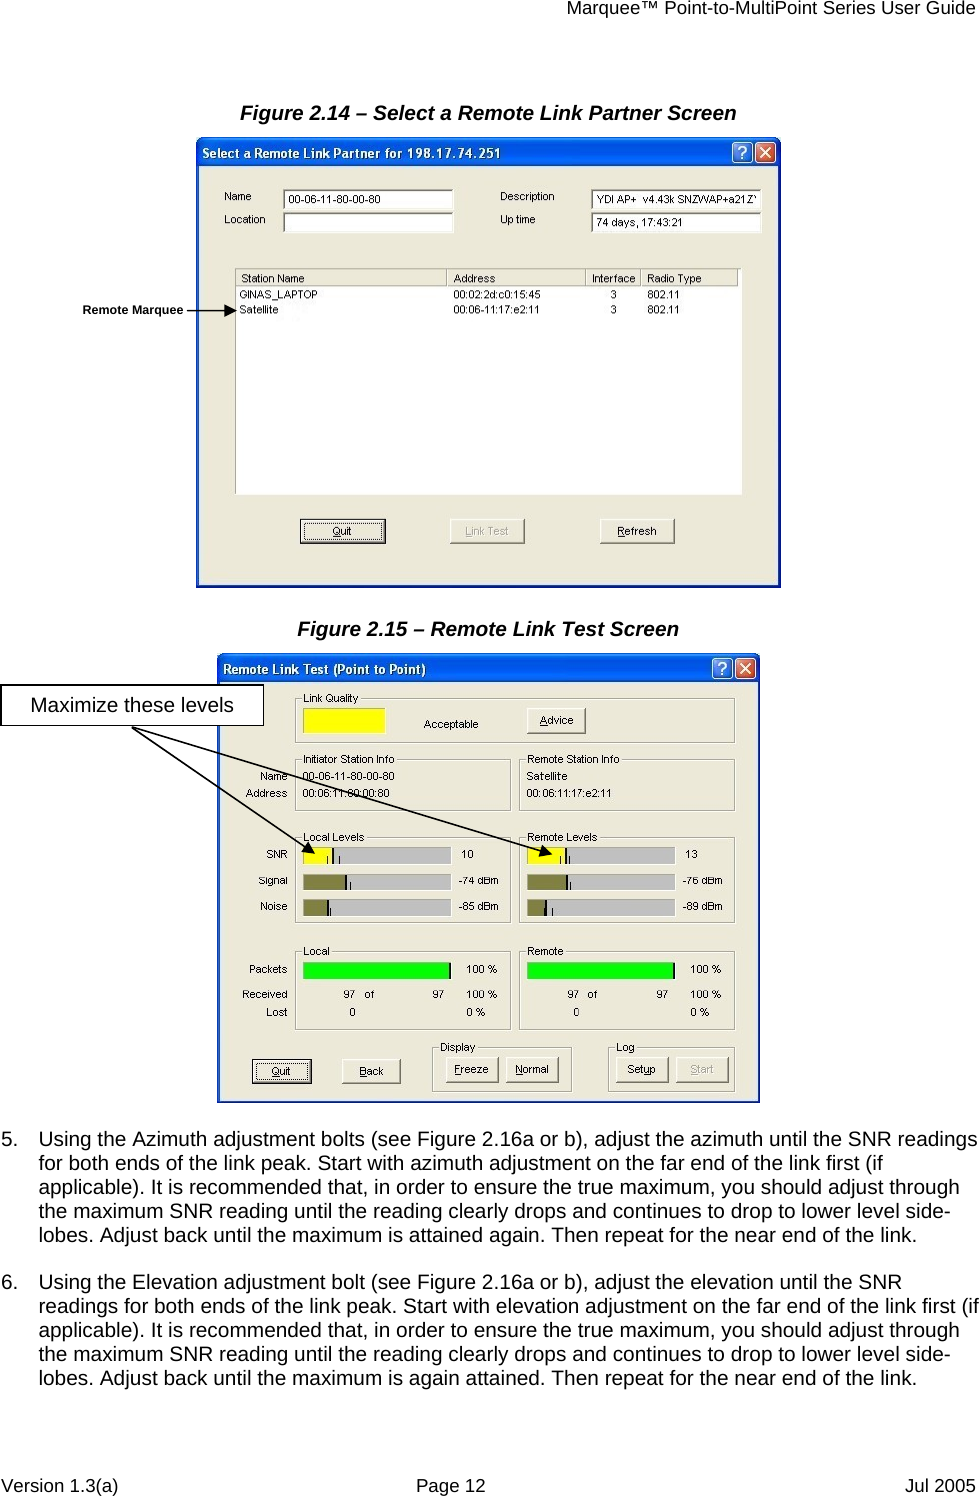     Marquee™ Point-to-MultiPoint Series User Guide Figure 2.14 – Select a Remote Link Partner Screen  Remote Marquee Figure 2.15 – Remote Link Test Screen  Maximize these levels  5.  Using the Azimuth adjustment bolts (see Figure 2.16a or b), adjust the azimuth until the SNR readings for both ends of the link peak. Start with azimuth adjustment on the far end of the link first (if applicable). It is recommended that, in order to ensure the true maximum, you should adjust through the maximum SNR reading until the reading clearly drops and continues to drop to lower level side-lobes. Adjust back until the maximum is attained again. Then repeat for the near end of the link.  6.  Using the Elevation adjustment bolt (see Figure 2.16a or b), adjust the elevation until the SNR readings for both ends of the link peak. Start with elevation adjustment on the far end of the link first (if applicable). It is recommended that, in order to ensure the true maximum, you should adjust through the maximum SNR reading until the reading clearly drops and continues to drop to lower level side-lobes. Adjust back until the maximum is again attained. Then repeat for the near end of the link.  Version 1.3(a)  Page 12  Jul 2005 